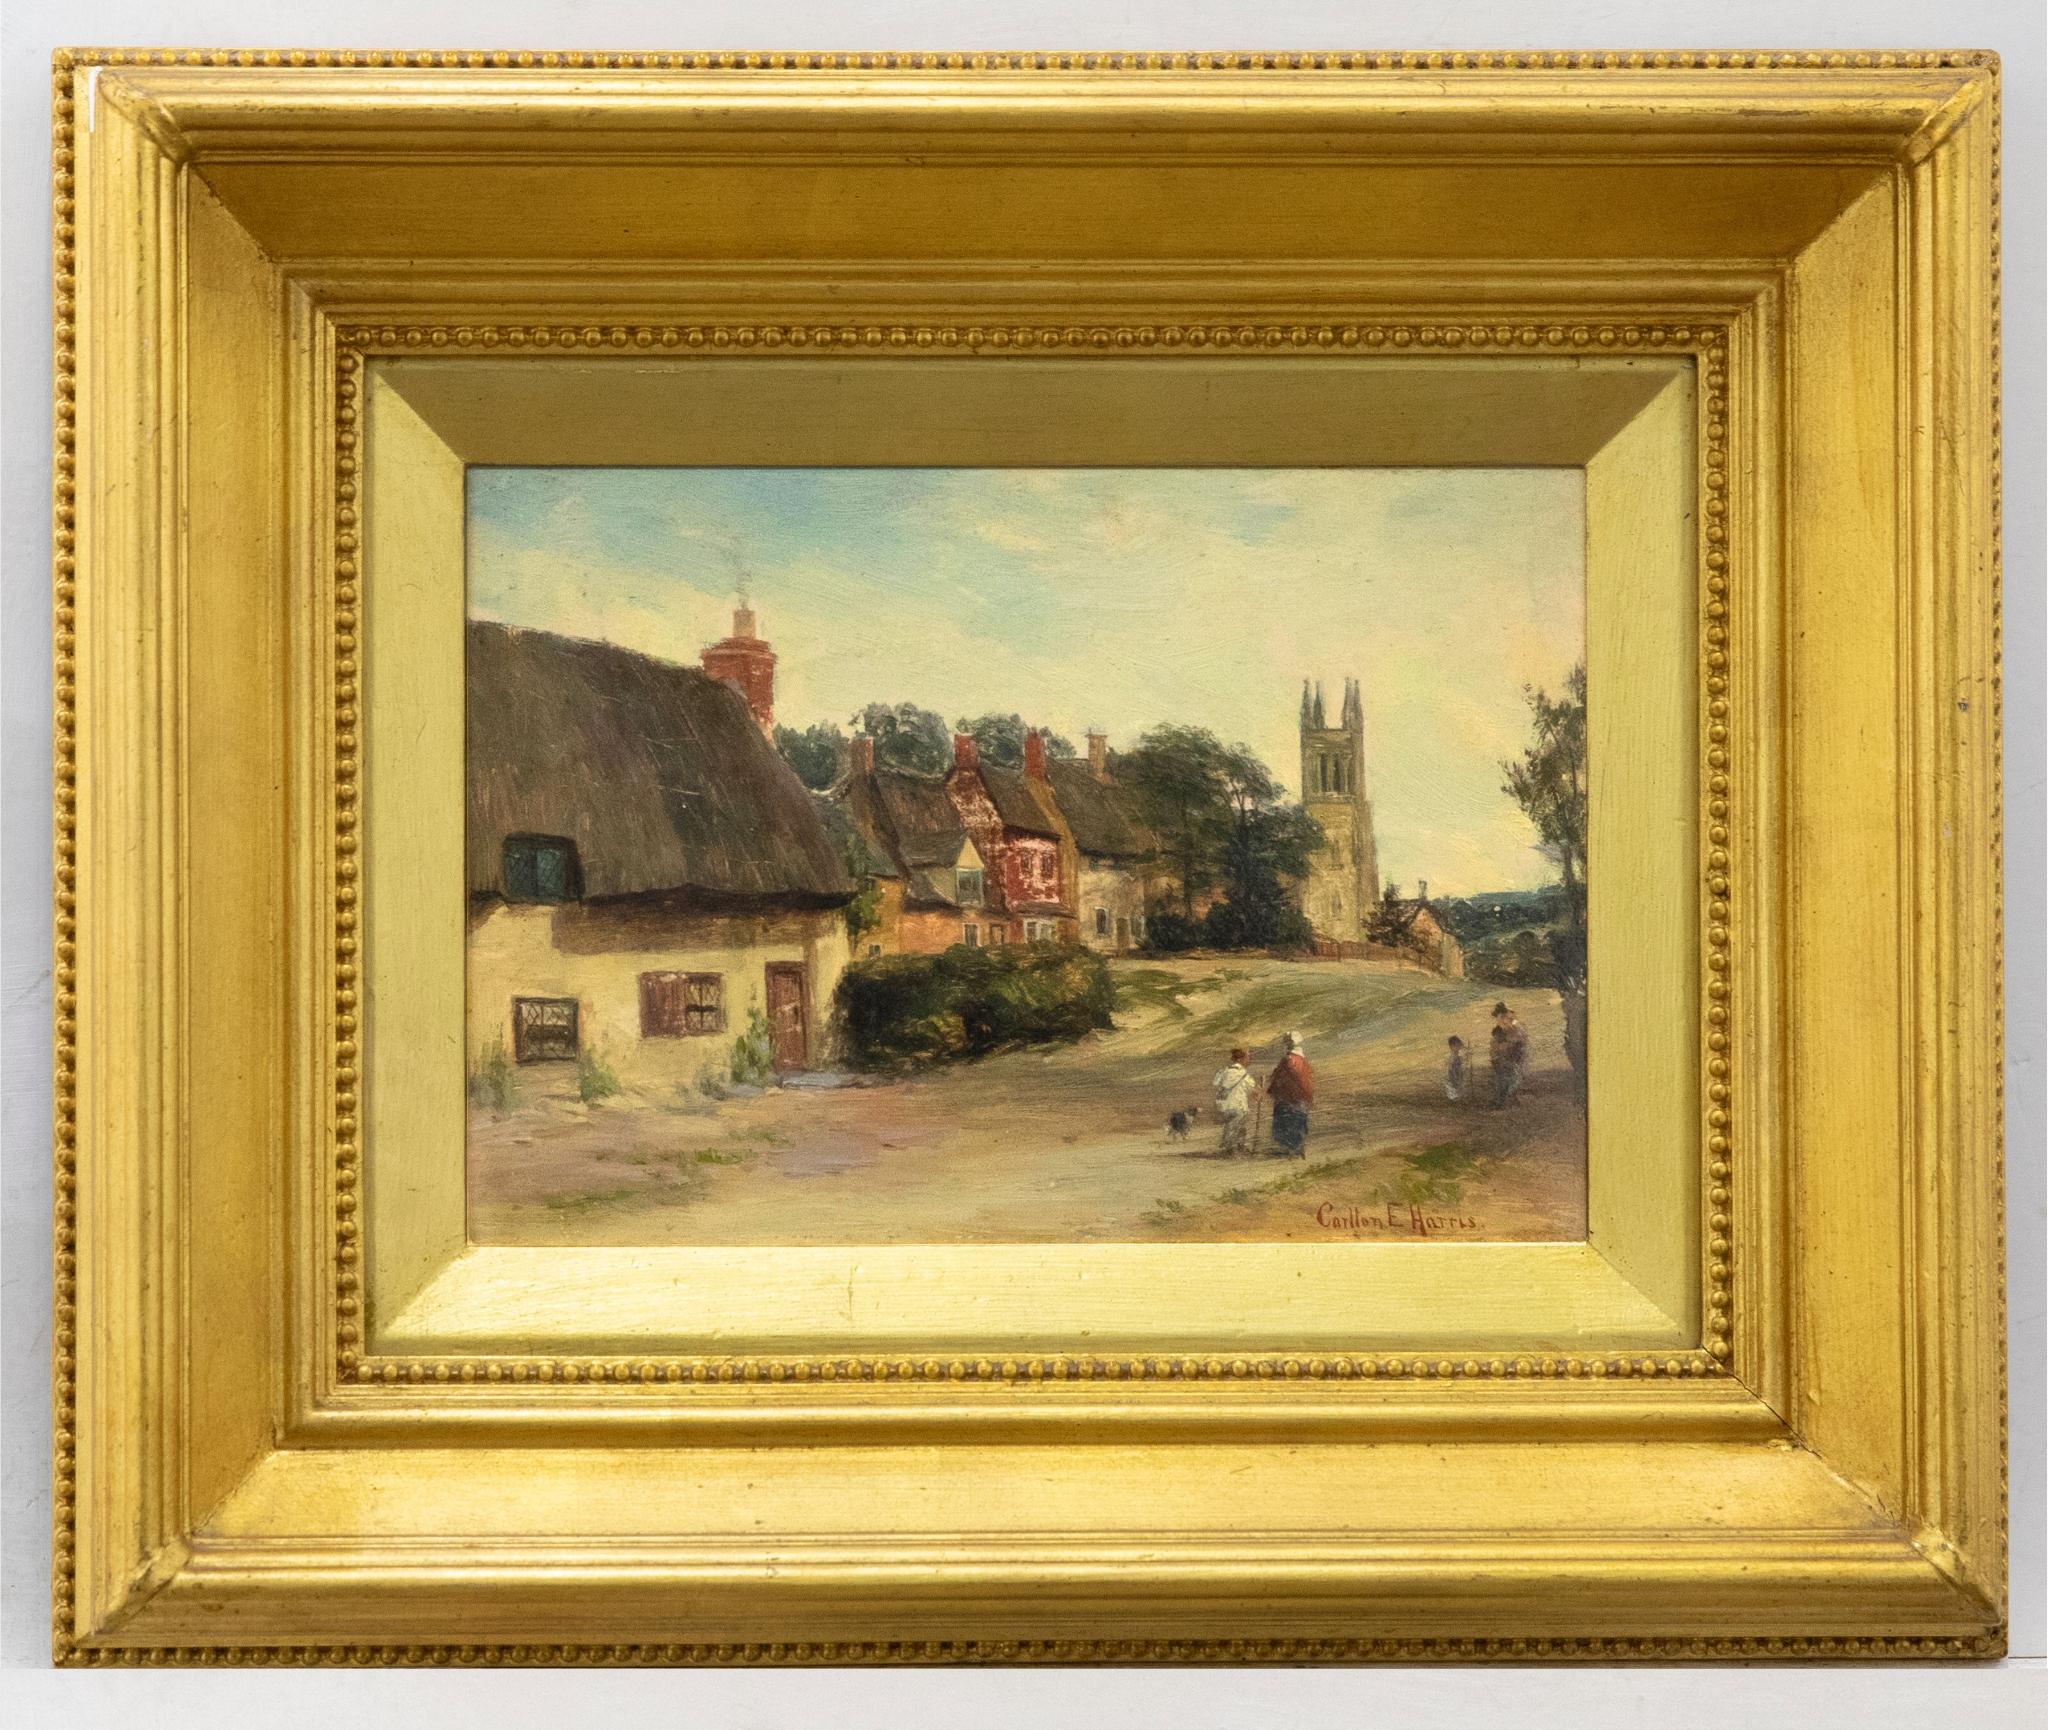 Unknown Landscape Painting - Carlton E. Harris - Late 19th Century Oil, View of the Village II